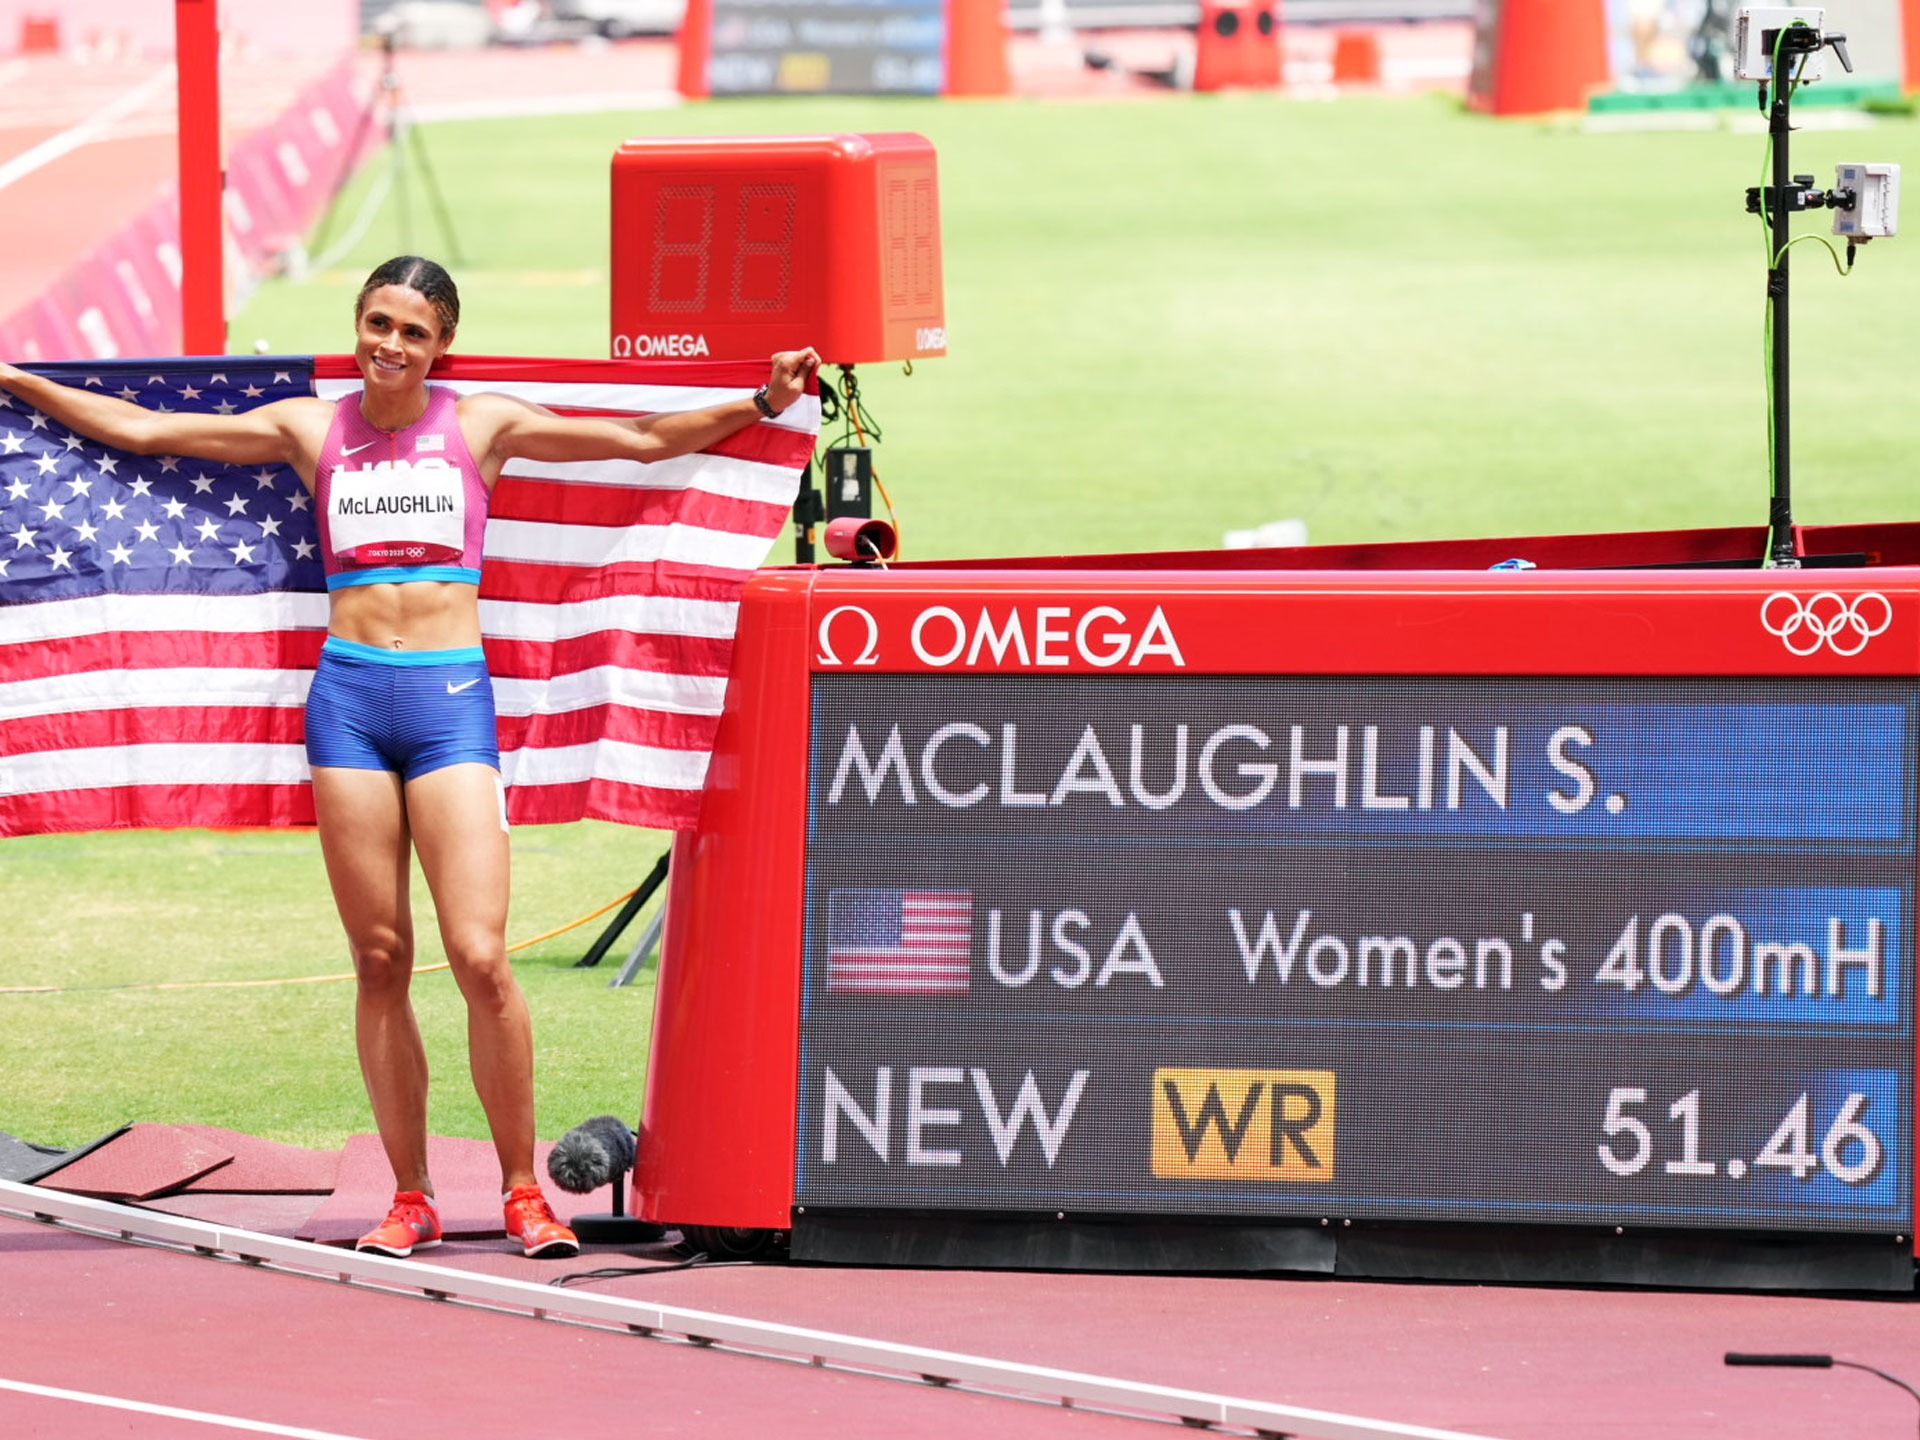  McLaughlin smashes world record, leads 1-2 U.S. finish in women’s 400m hurdles 